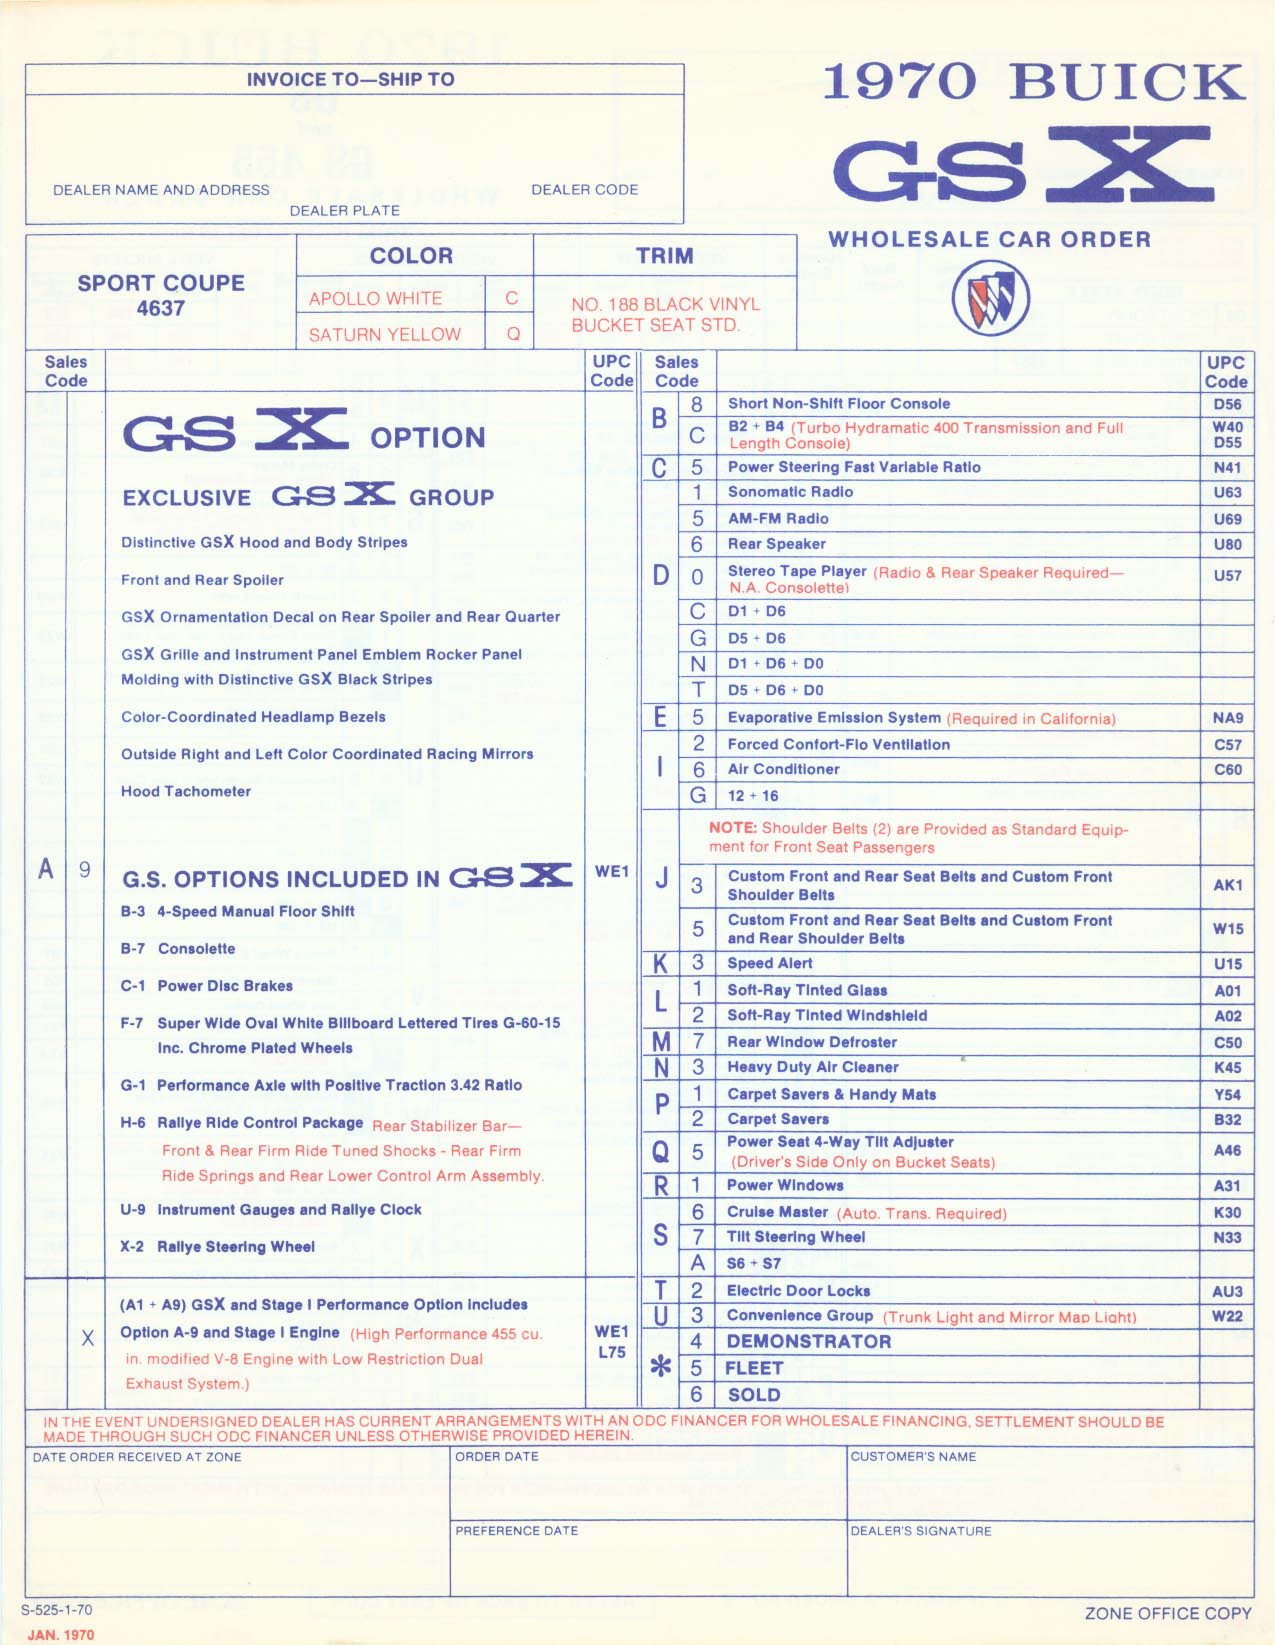 1970 Buick GSX Order Form, Options and Codes